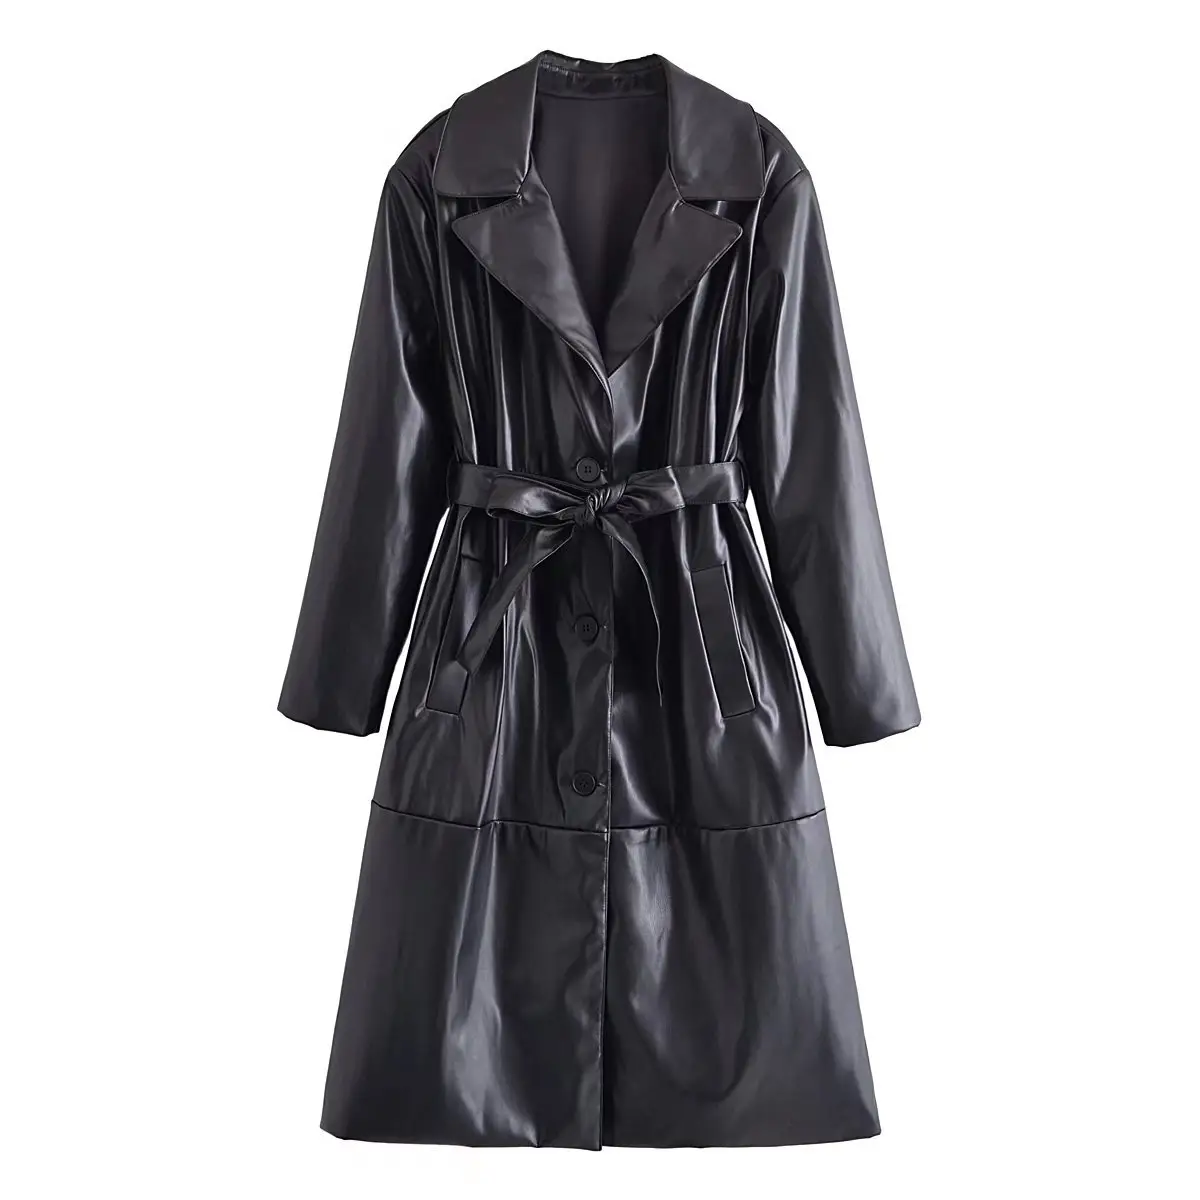 2022 autumn new product Europe and America cross-border women's fashion street leisure long leather trench coat